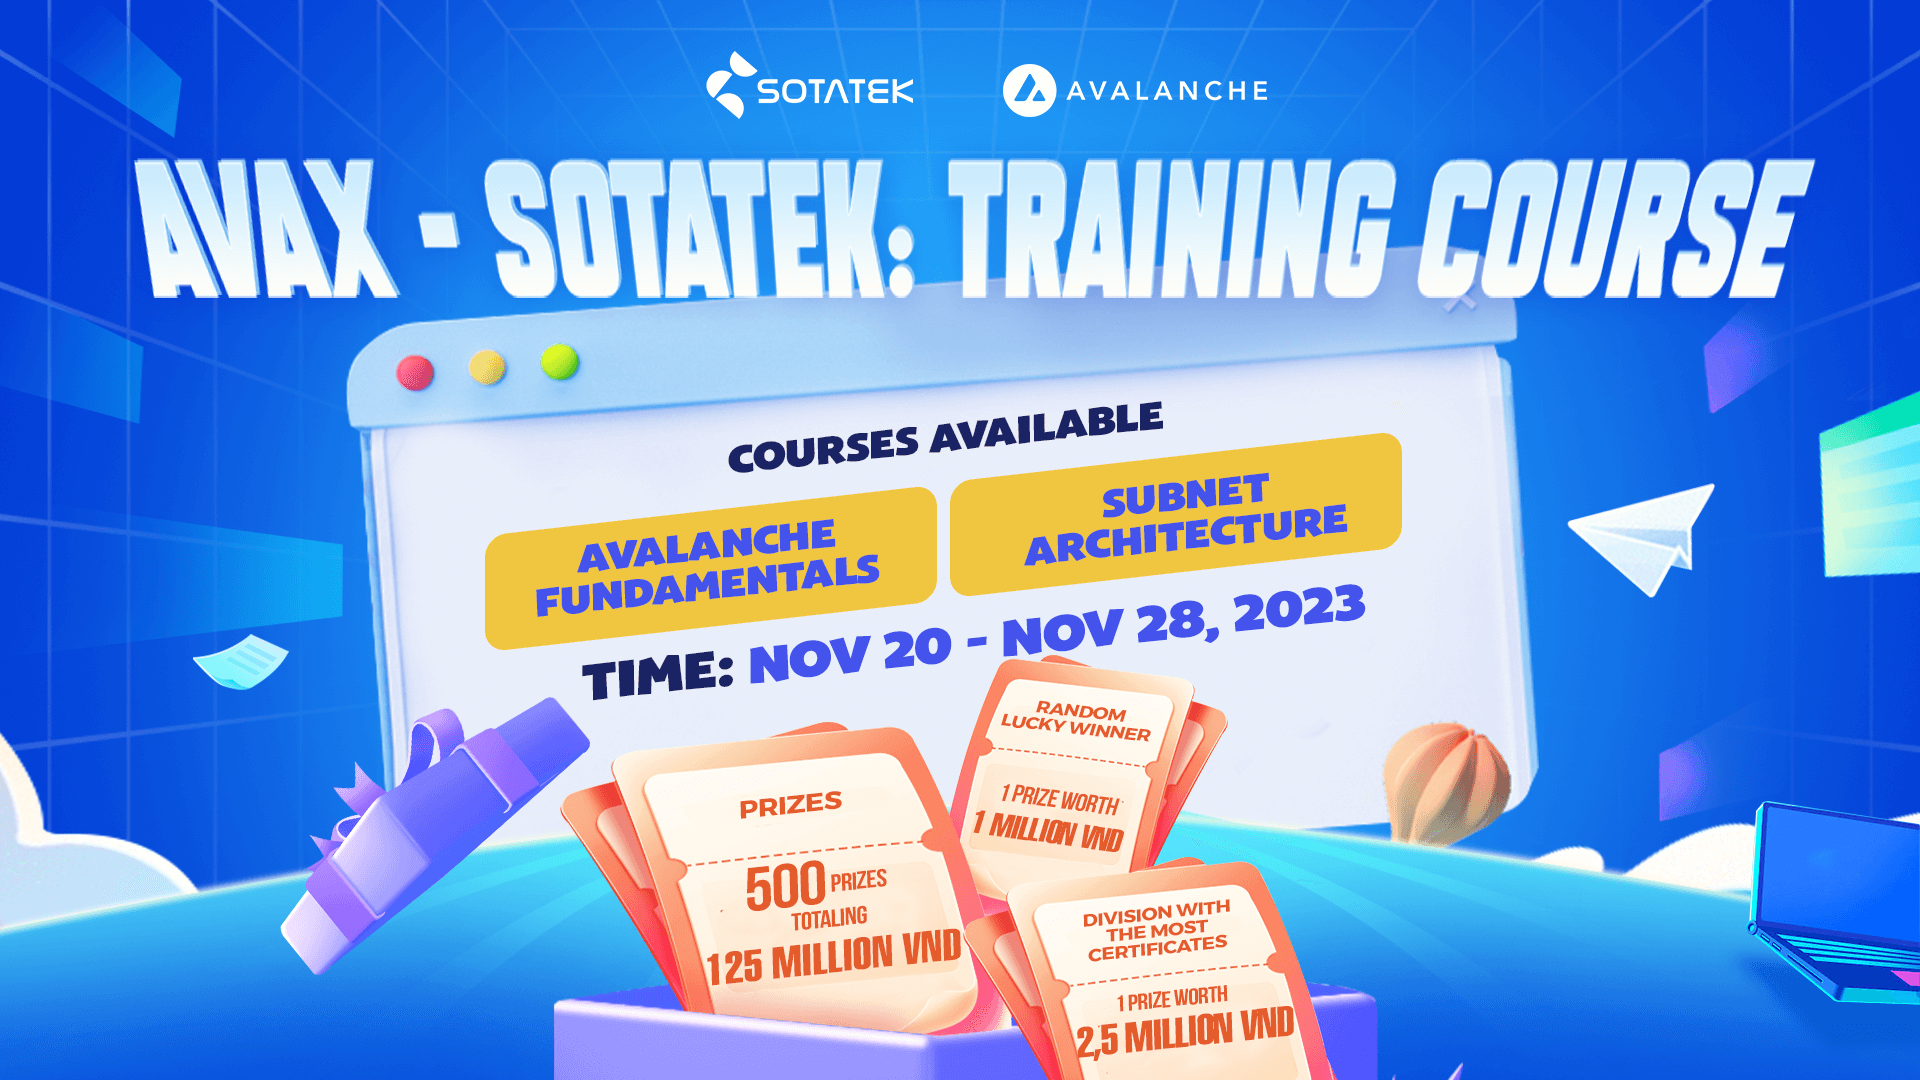 AVAX x SotaTek: Training Course with Scholarships Worth 125 Million VND